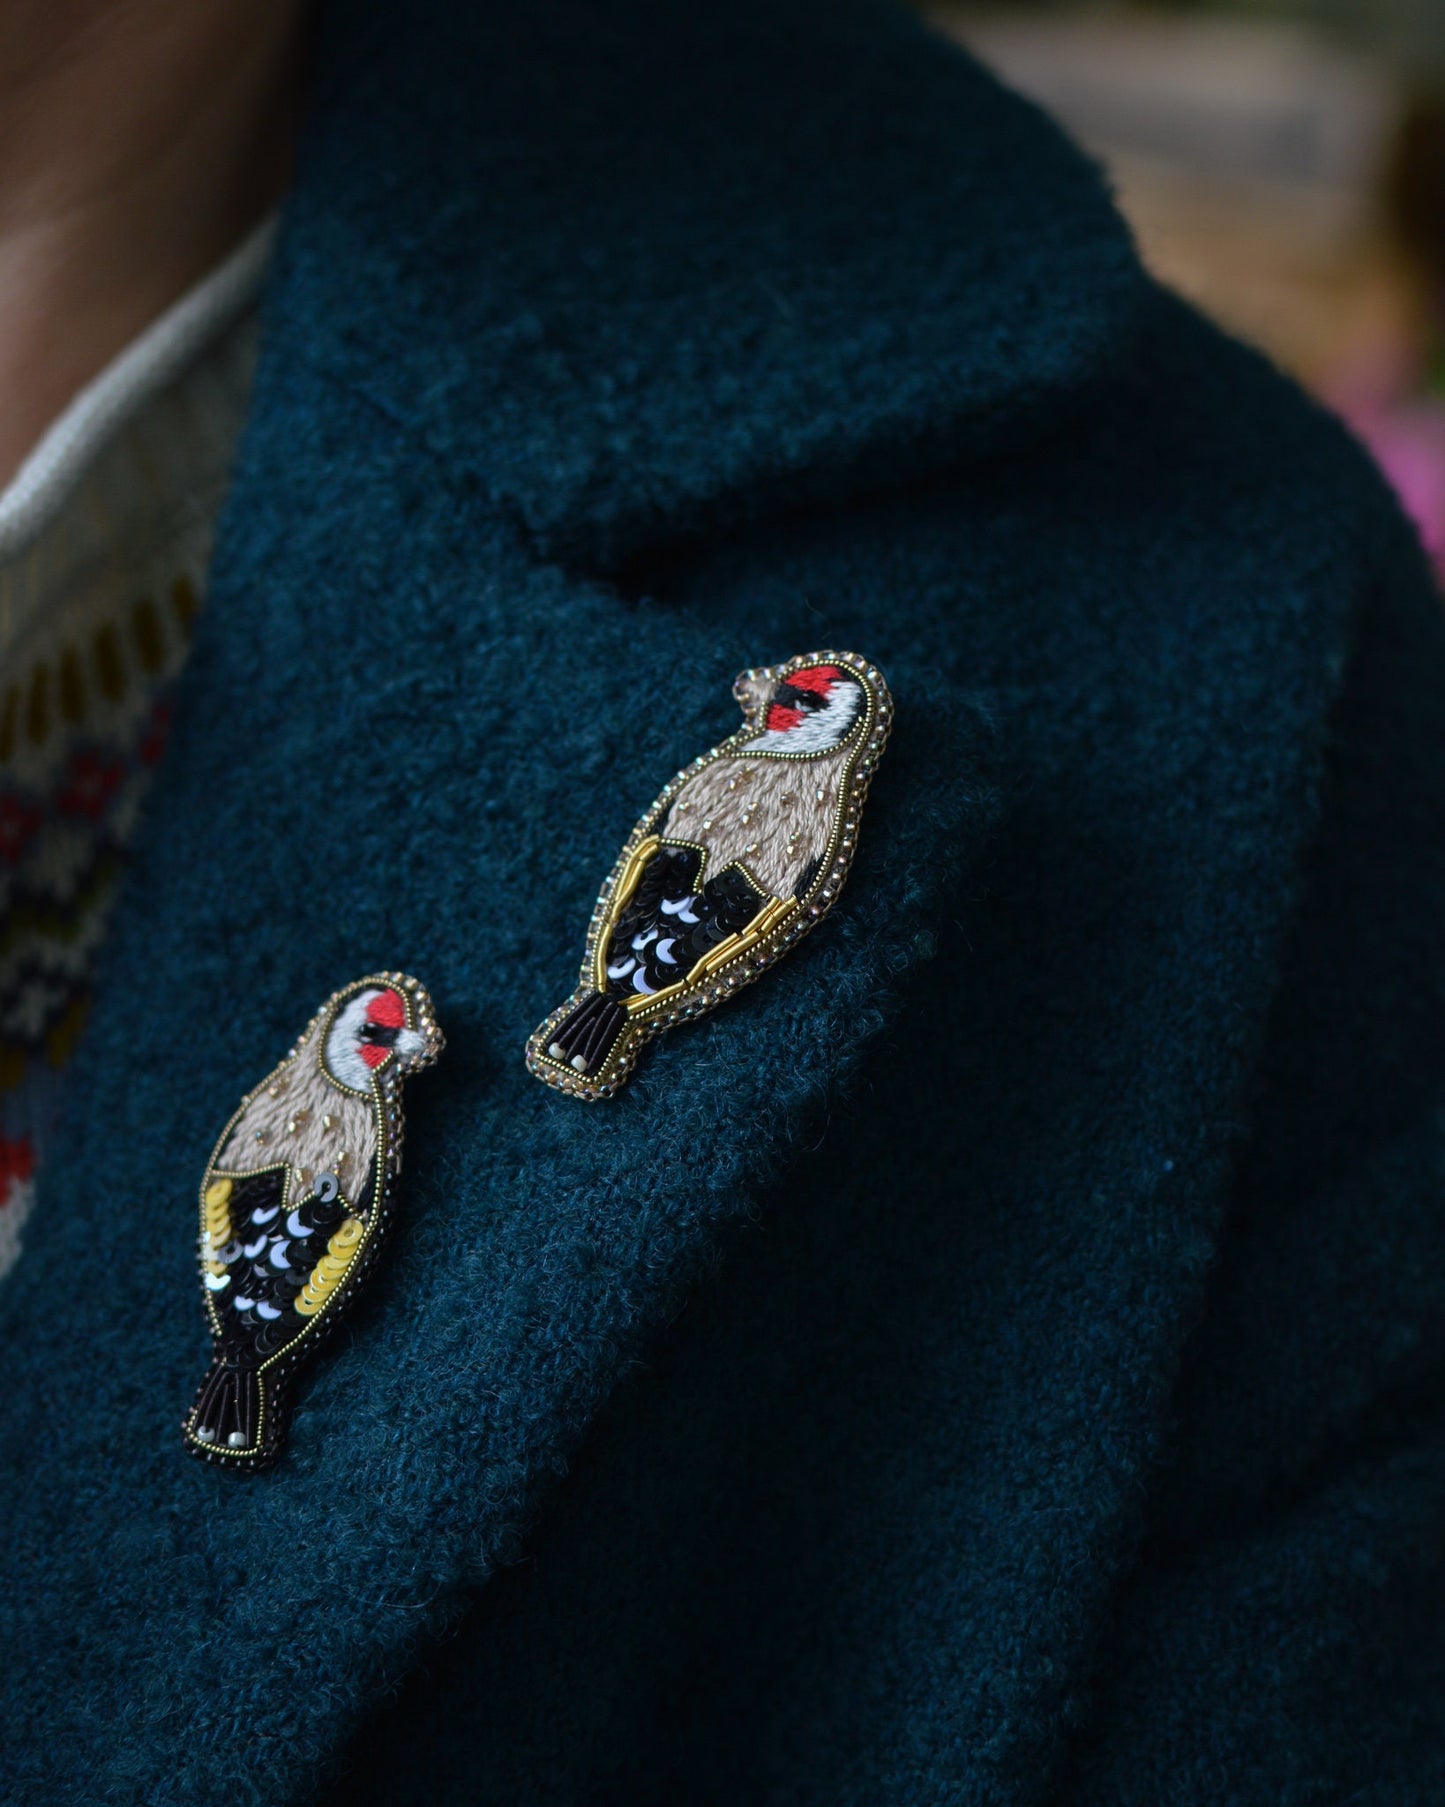 Embroidered goldfinch brooches worn on a cot lapel